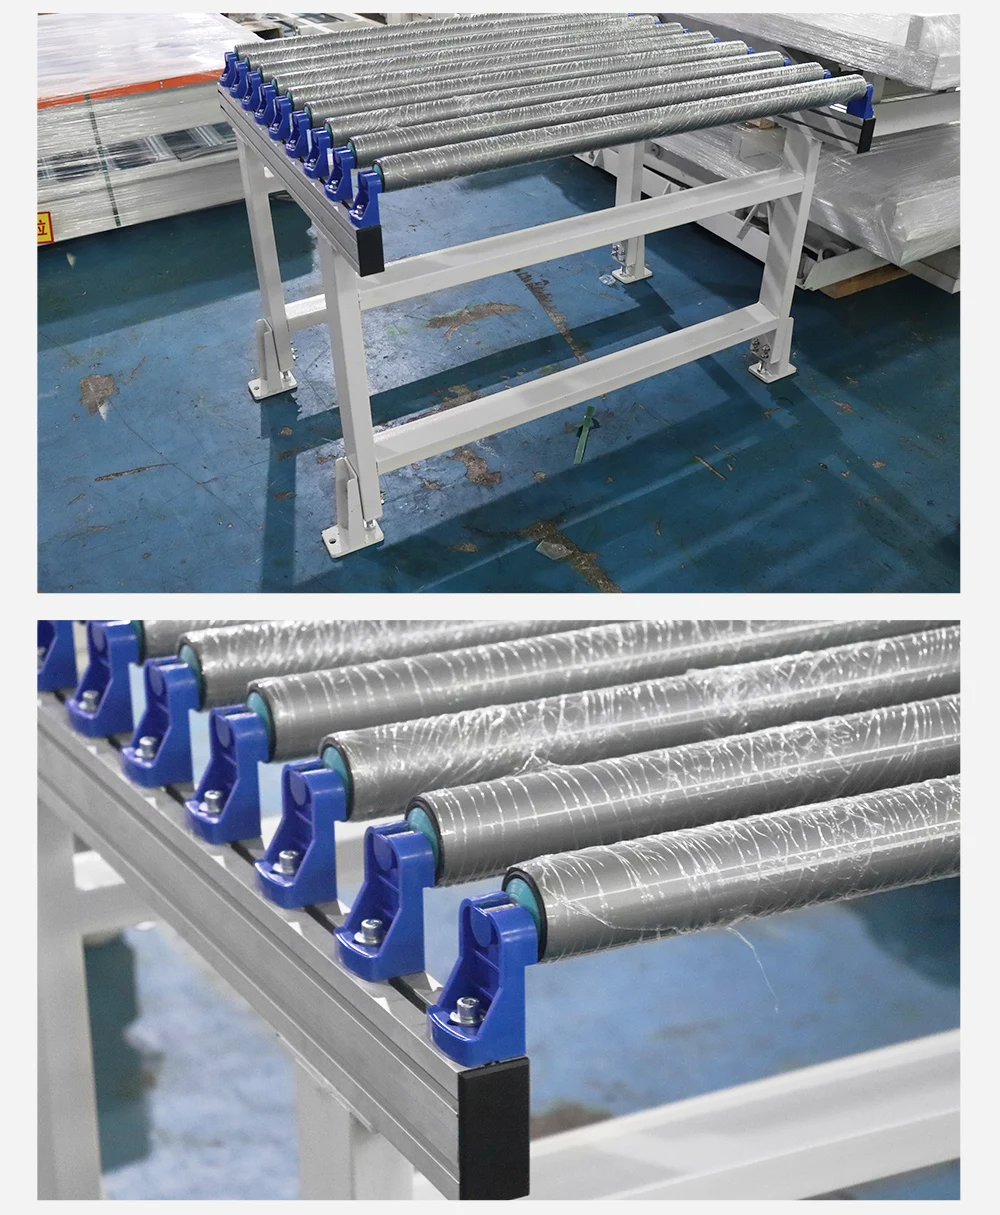 Seamless Edge Sealing: Small Short Roller Tables with Smooth Rolling Mechanism details